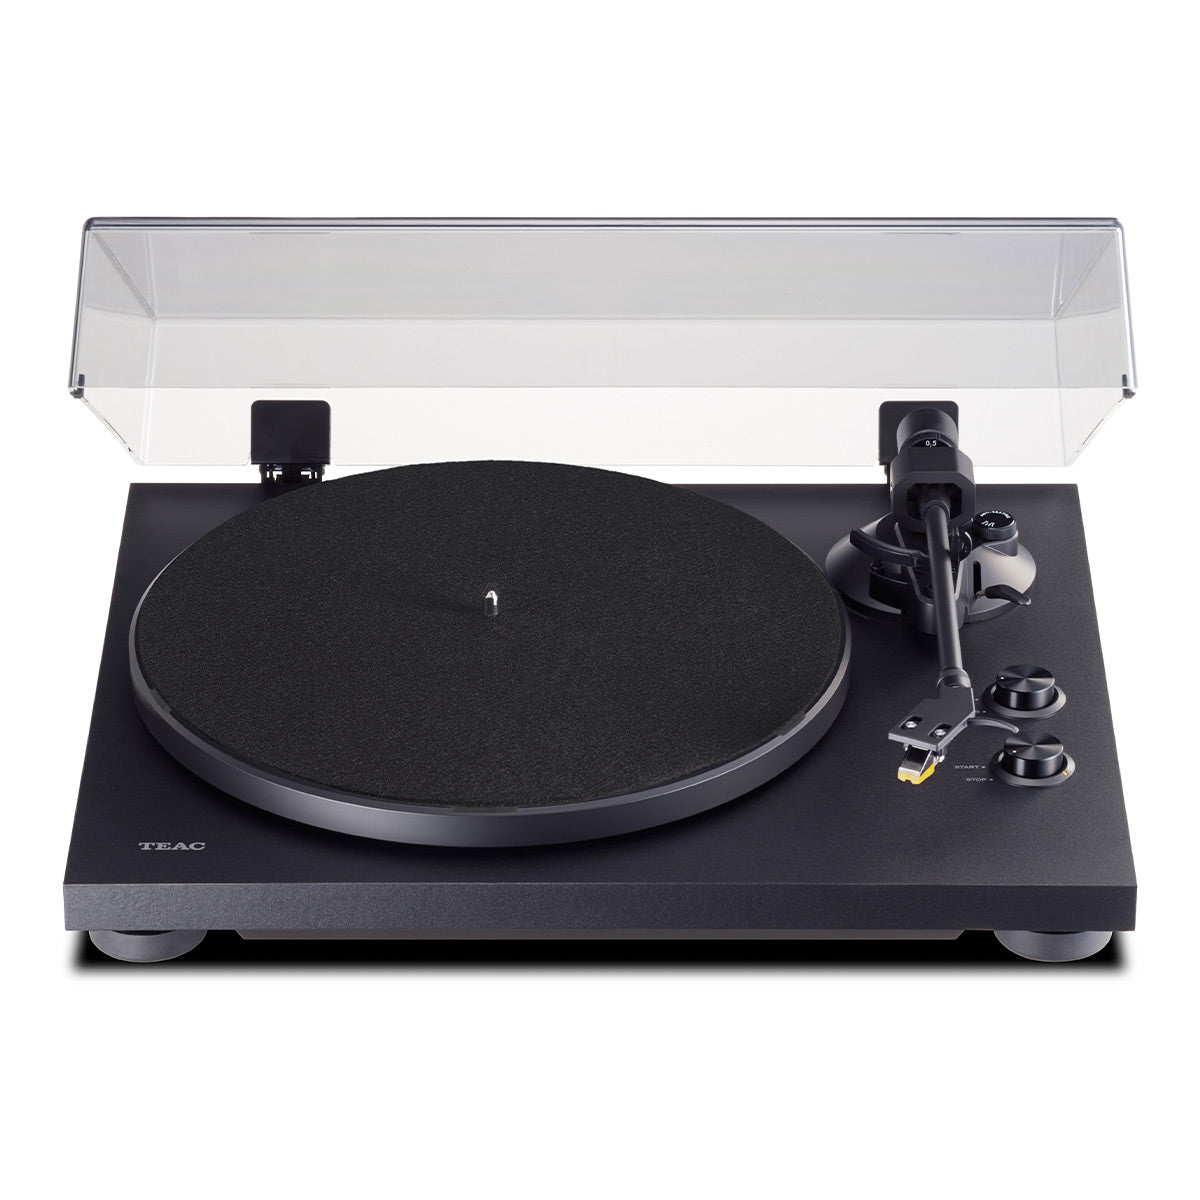 TEAC TN-280BT-A3 Belt-Drive Wireless Turntable with Bluetooth, Built-In Phono Amp, and Pre-Installed Audio-Technica MM Cartridge (Black)